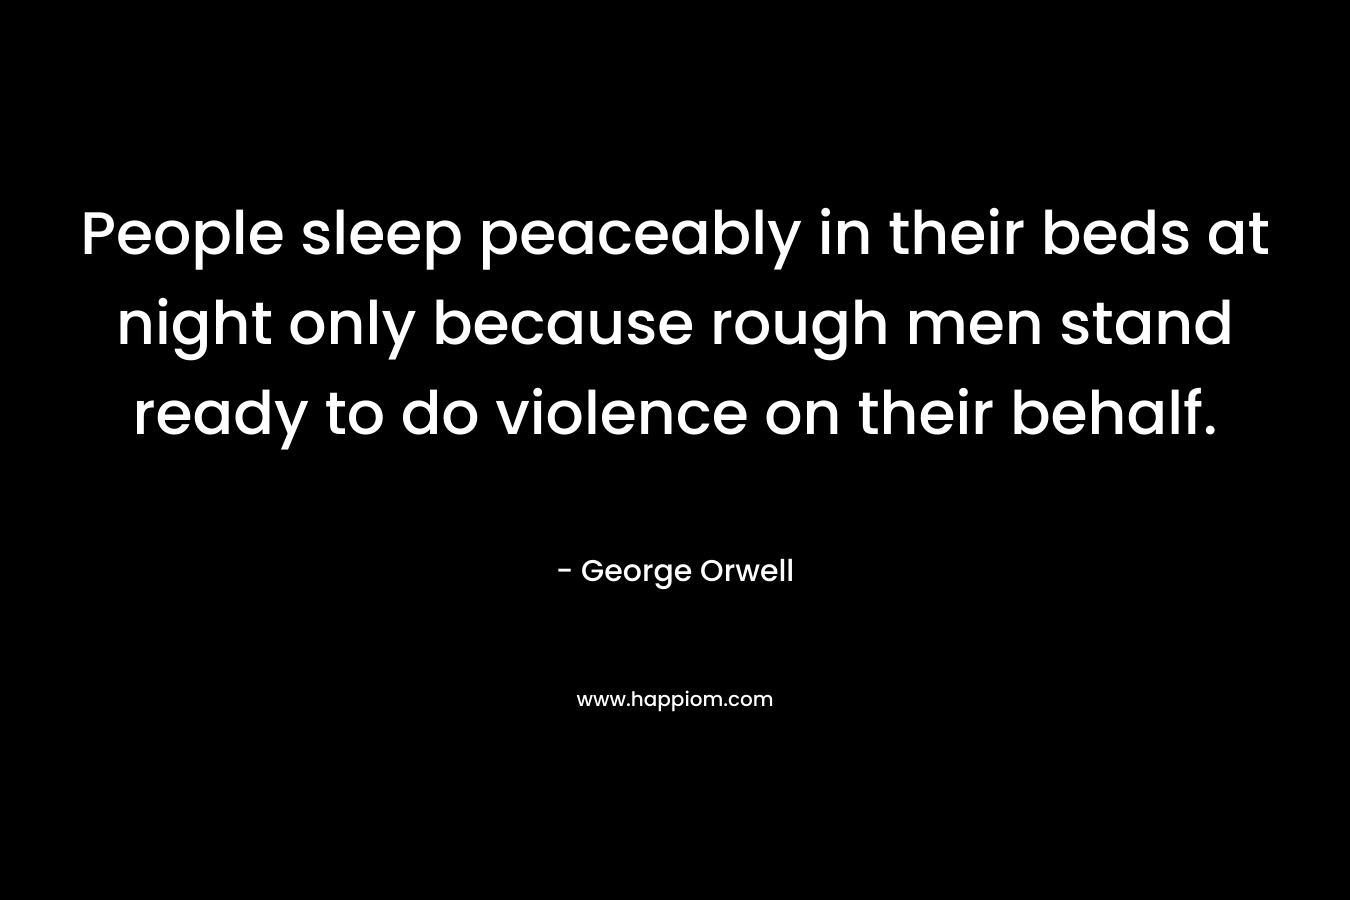 People sleep peaceably in their beds at night only because rough men stand ready to do violence on their behalf.